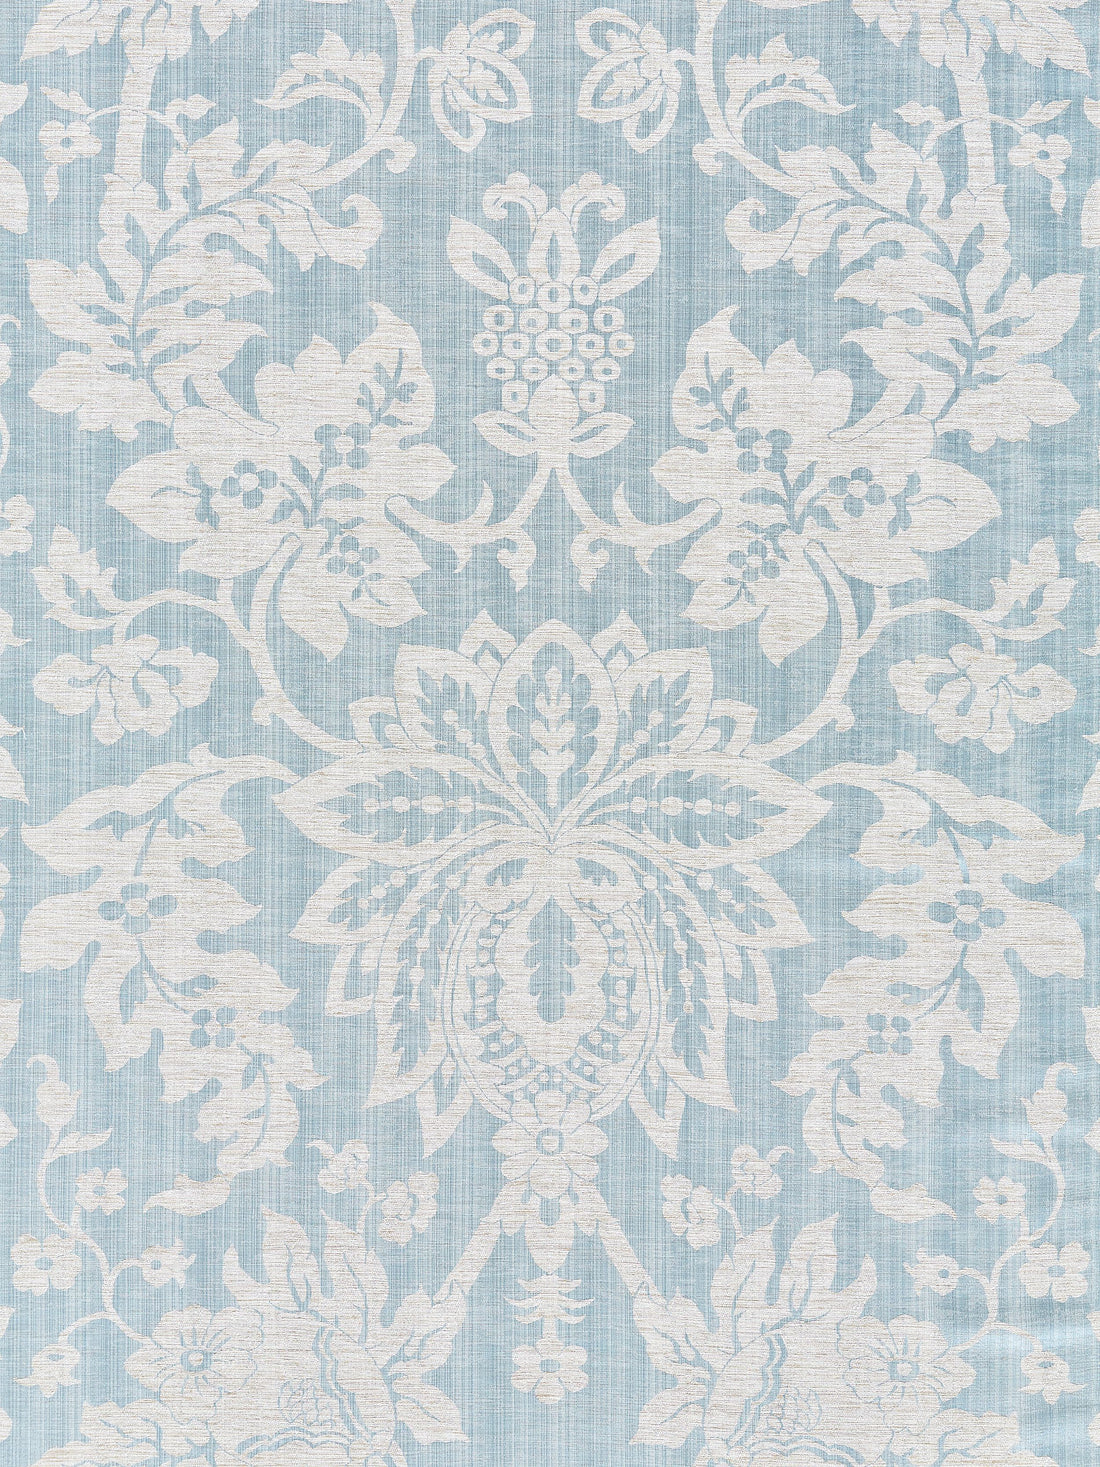 Metalline Damask fabric in bluestone color - pattern number SC 000327136 - by Scalamandre in the Scalamandre Fabrics Book 1 collection